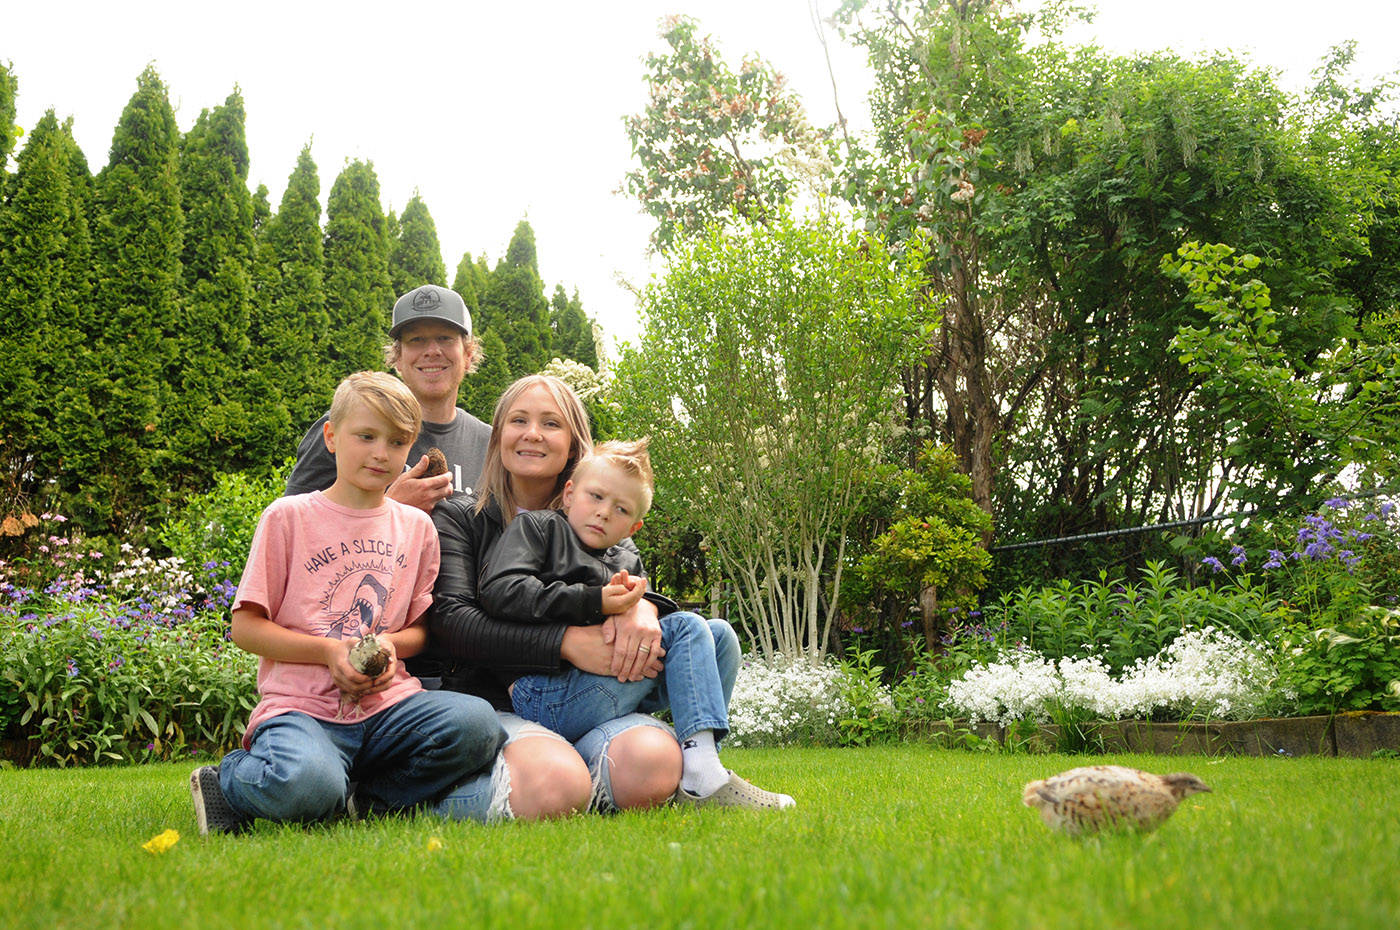 The Meredith family (Nick, Nicole, 10-year-old Lukas and eight-year-old Bowen) pose with three of their pet quail in their backyard in Chilliwack on Friday, May 28, 2021. The family was ordered to move their backyard quail or face a fine. (Jenna Hauck/ Chilliwack Progress)